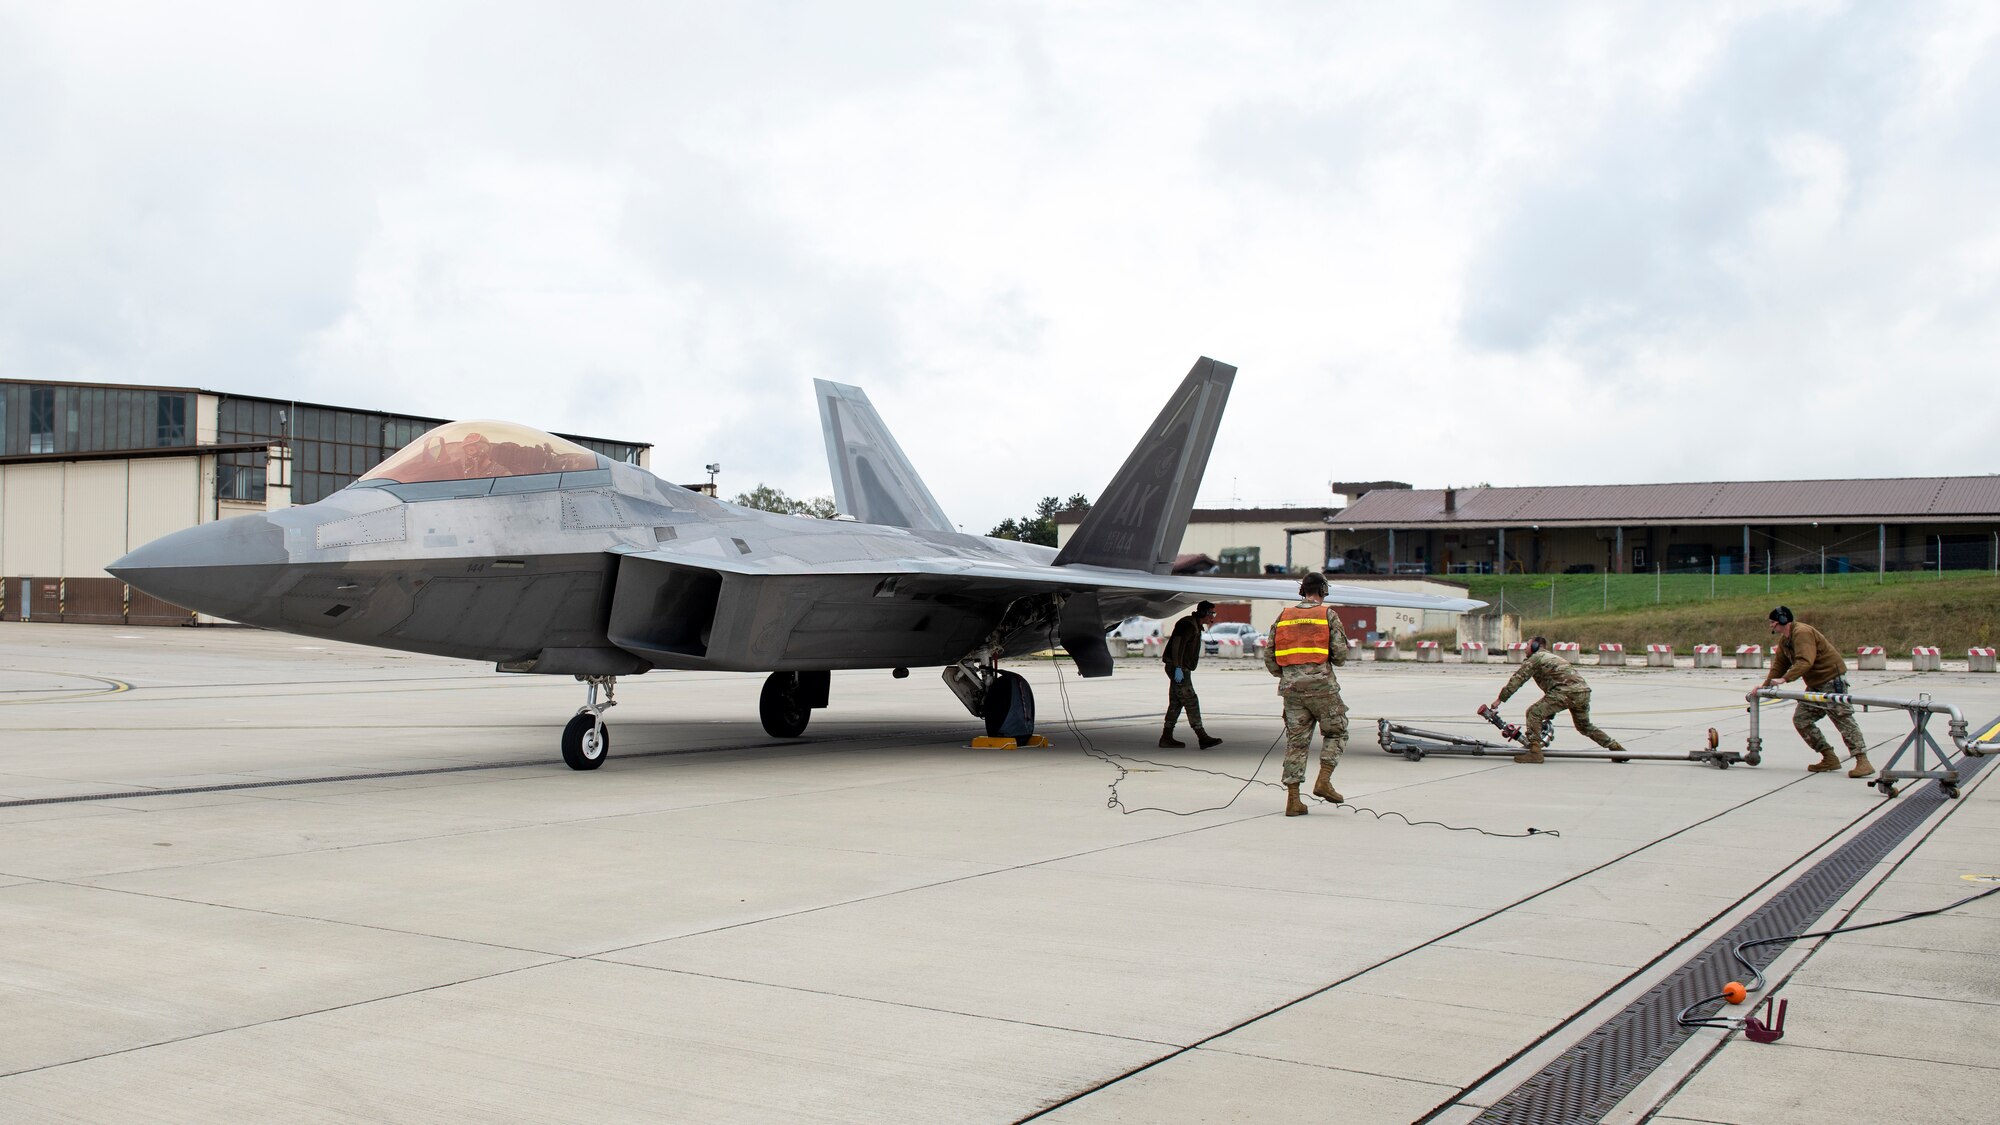 An F-22 Raptor gets refueled prior to take off at Spangdahlem Air Base, Germany.